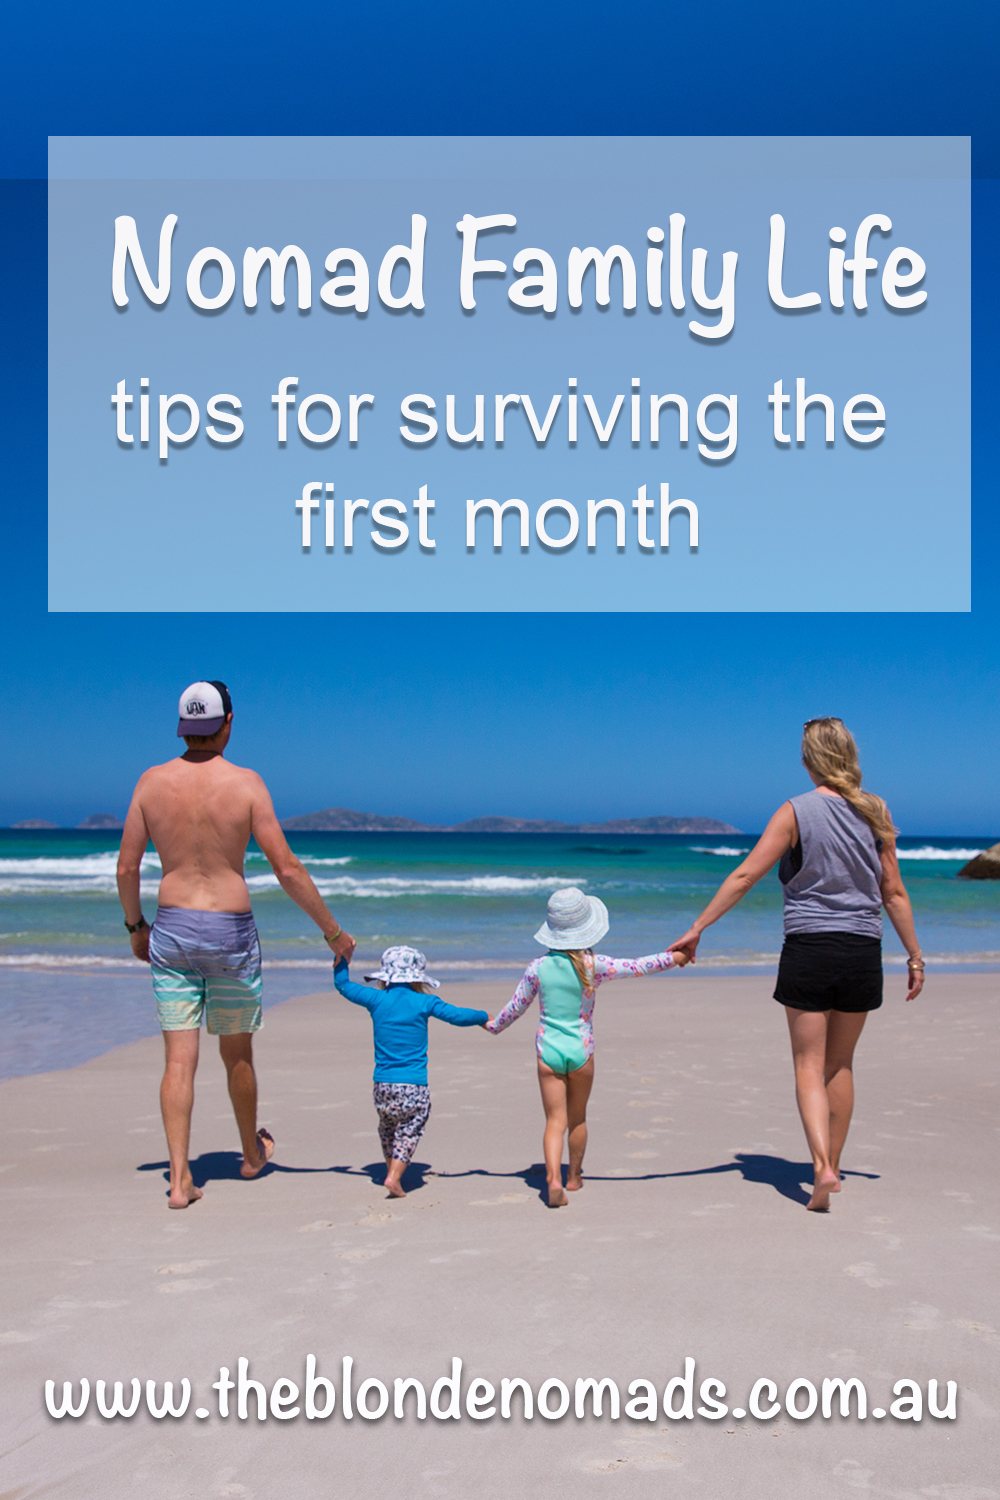 nomad tips by the blonde nomads www.theblondenomads.com.au